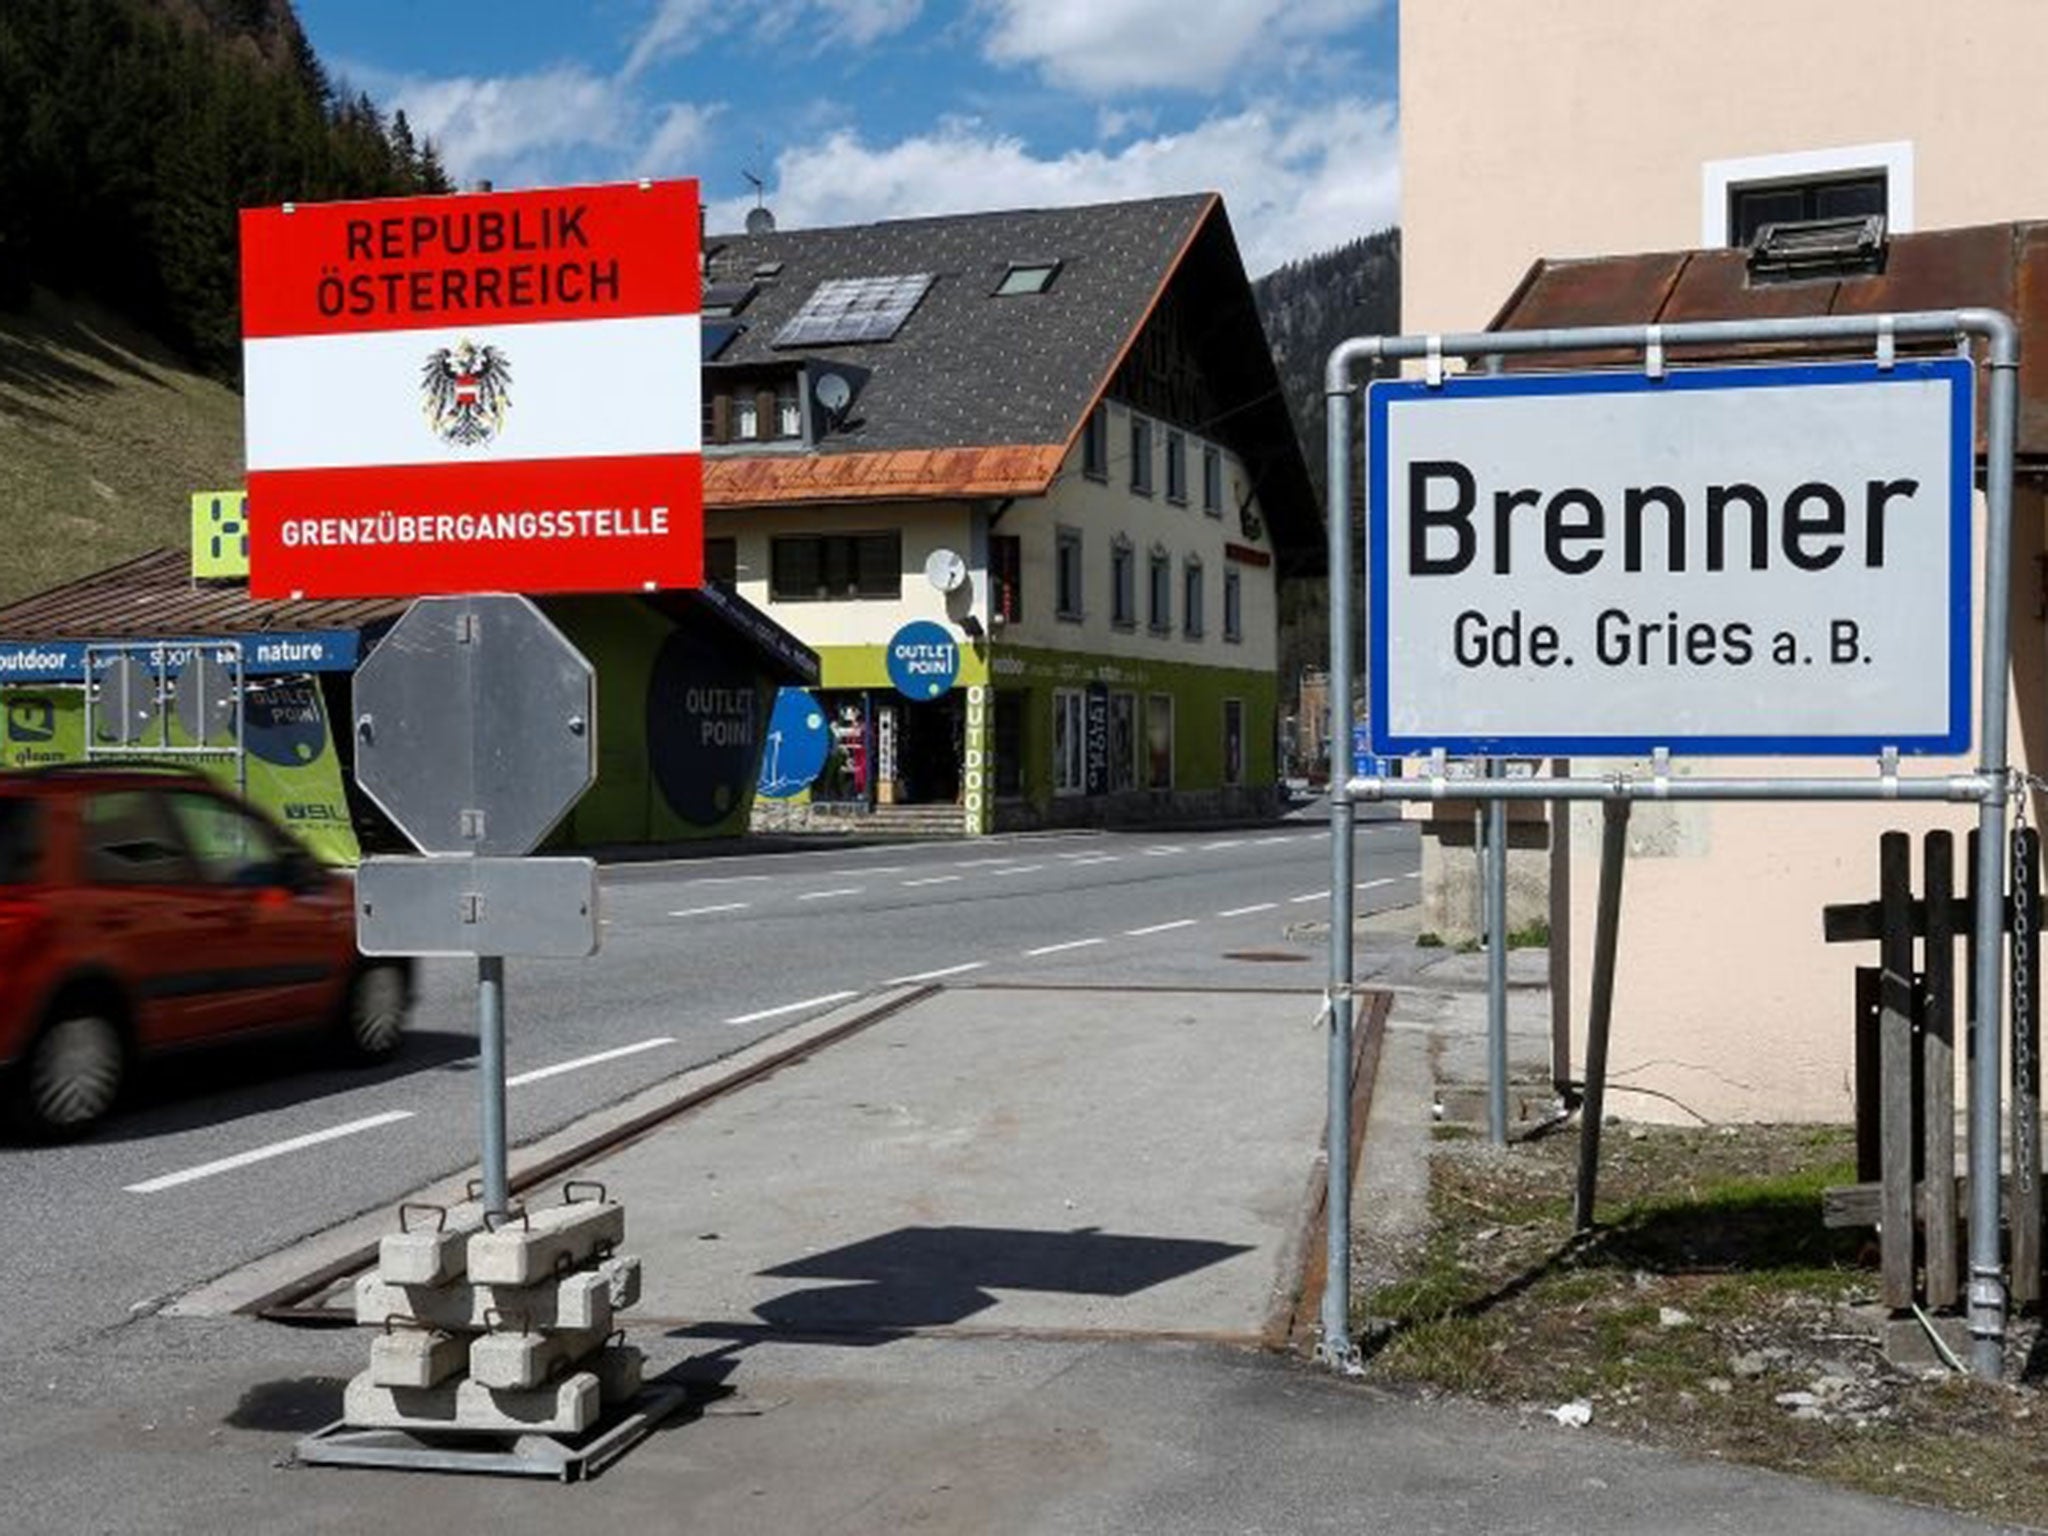 Austrian police say they have begun pouring concrete for foundations of a registration hall, barriers and other structures at Brenner, on the Italian-Austrian border